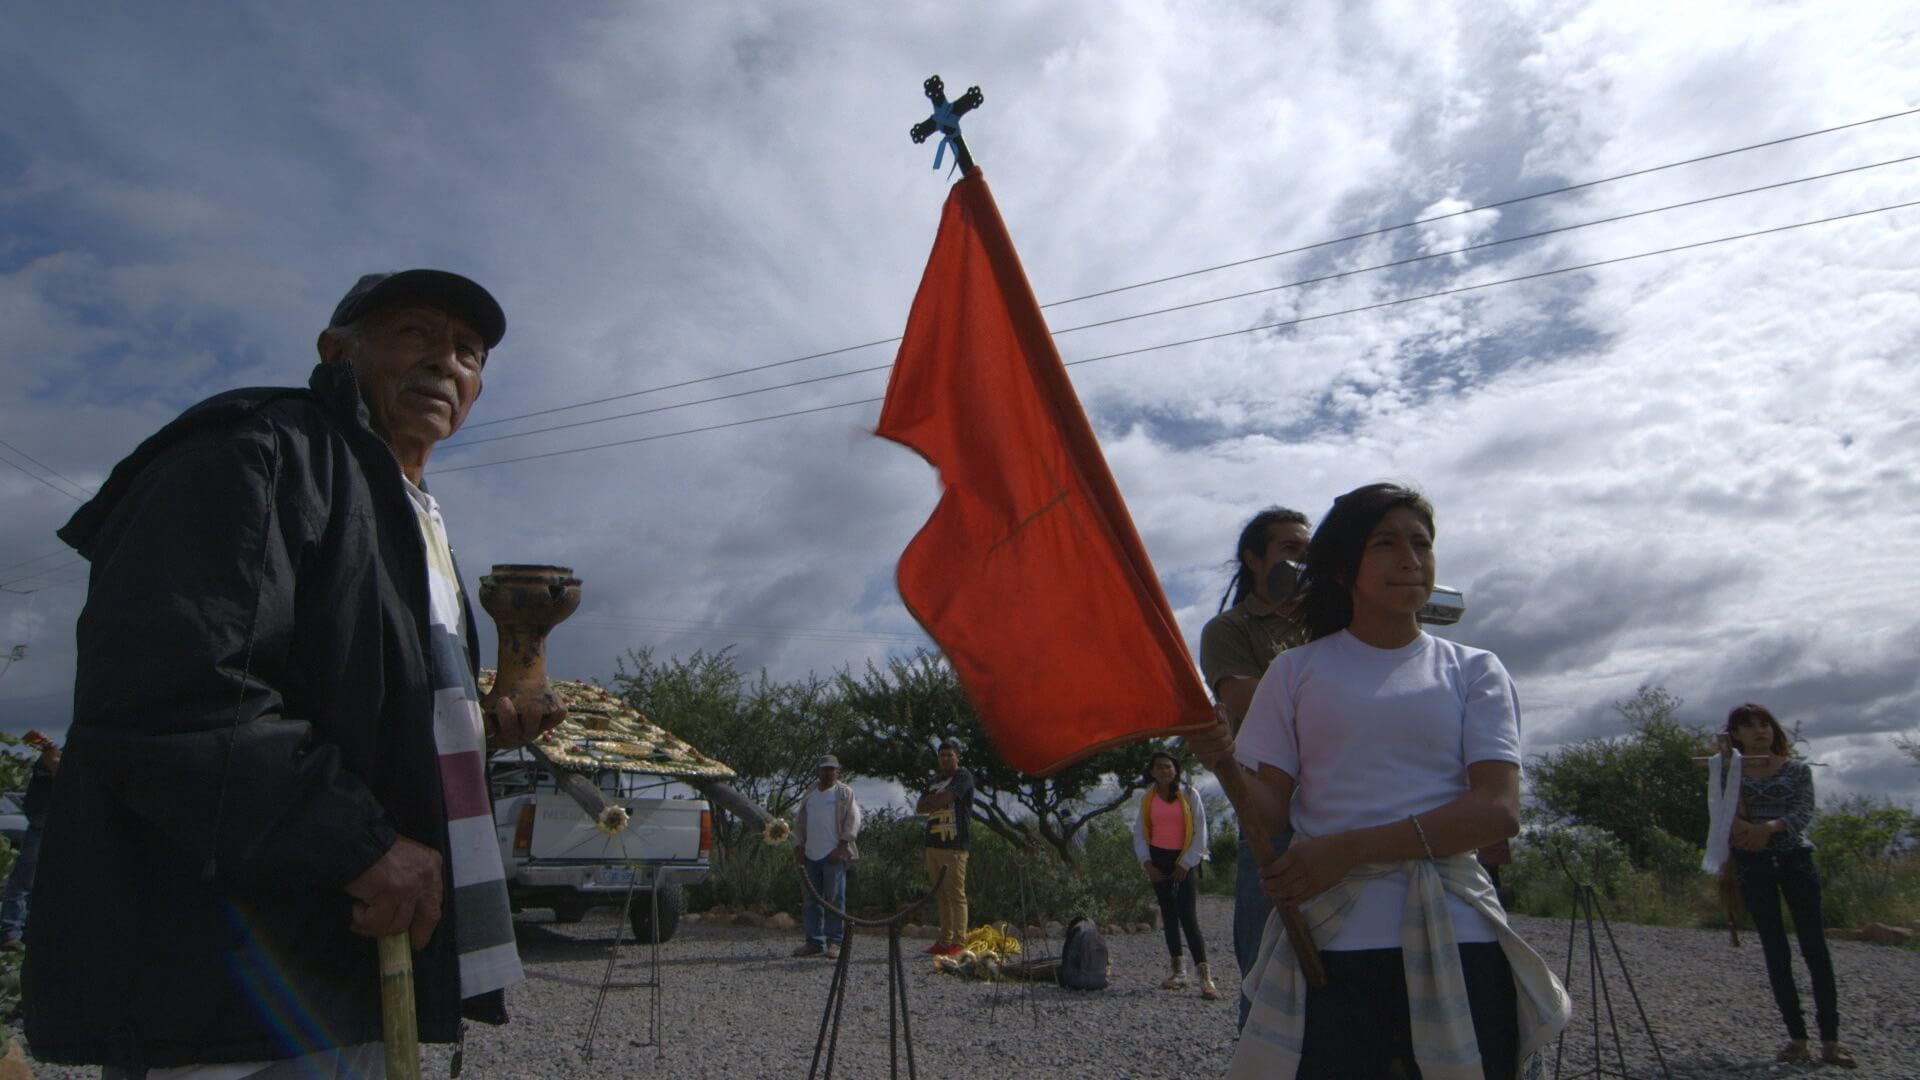 A still from The Age of Water. A person in a white T-shirt is holding a tall red flag with a cross atop the mast. Four other people stand behind them, in a patch of gravel.